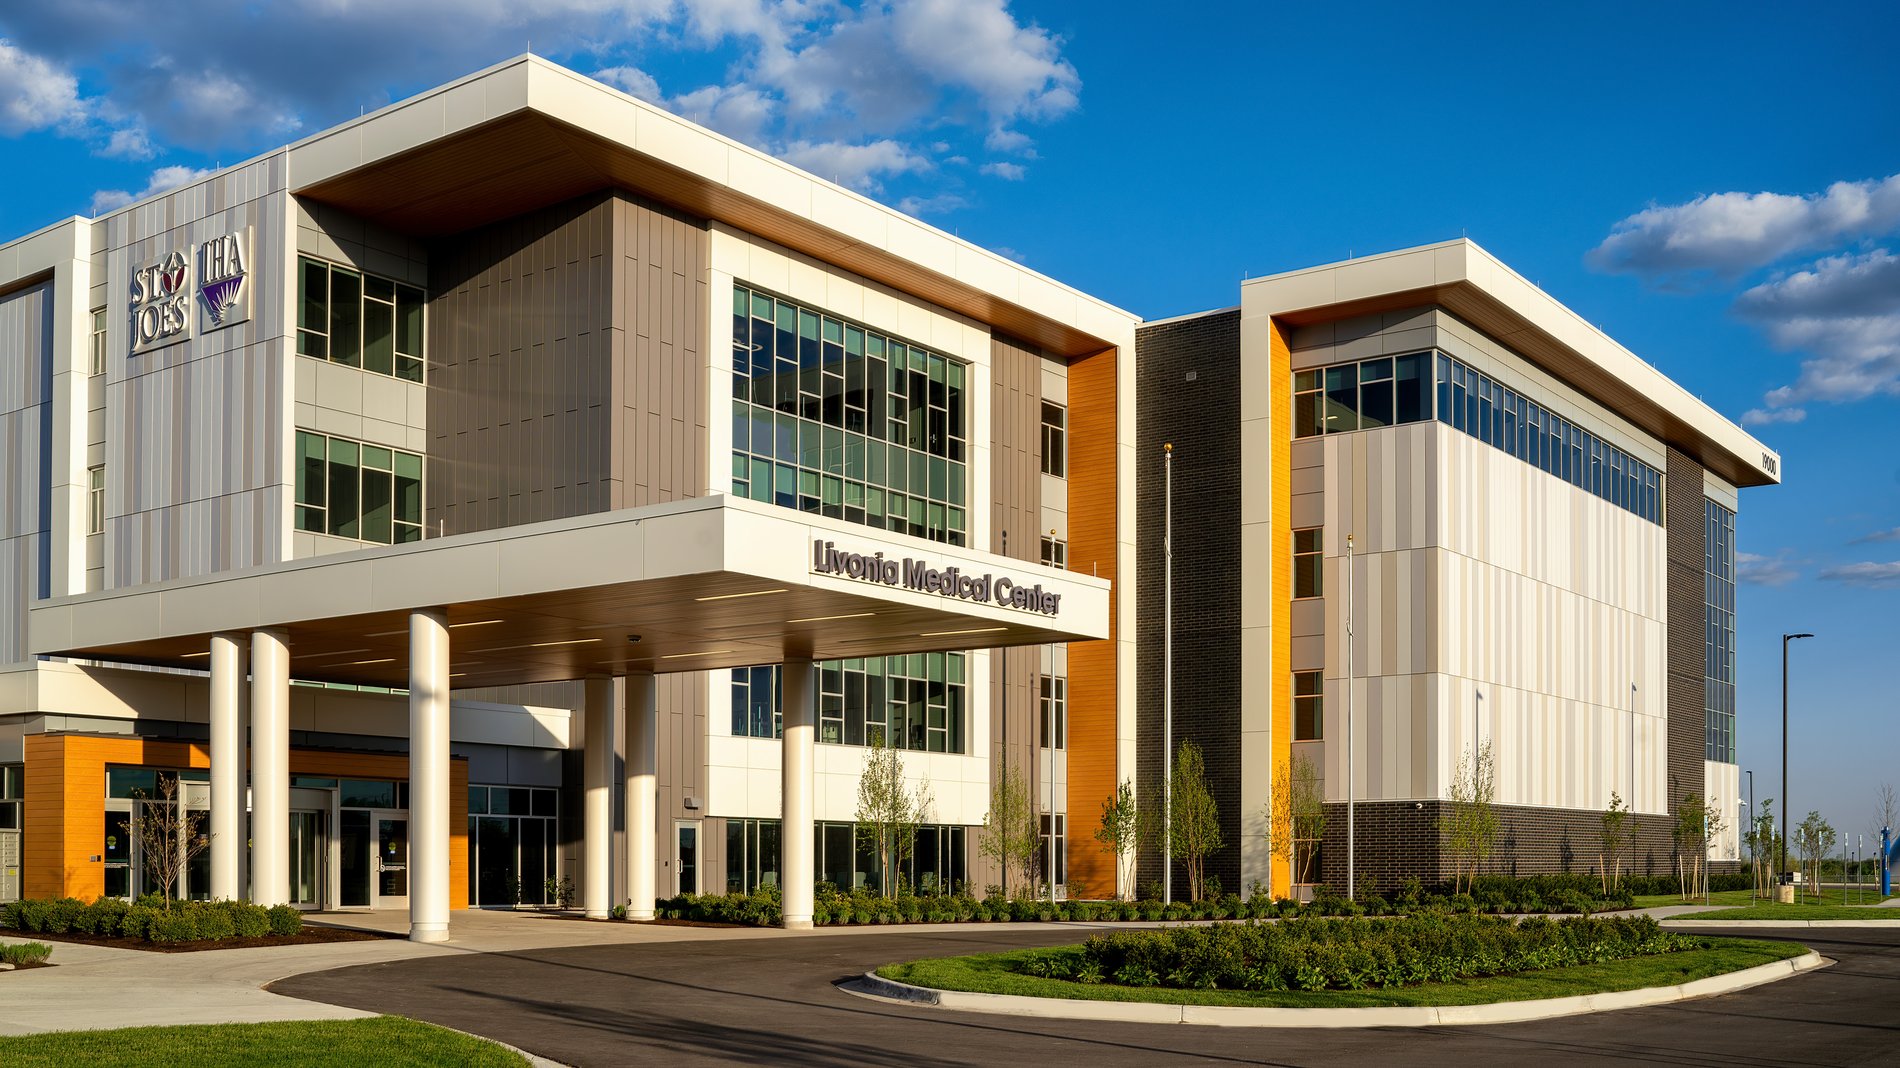 Trinity Health IHA Medical Group, Obstetrics & Gynecology - Schoolcraft Campus is located at the Livonia Medical Center.